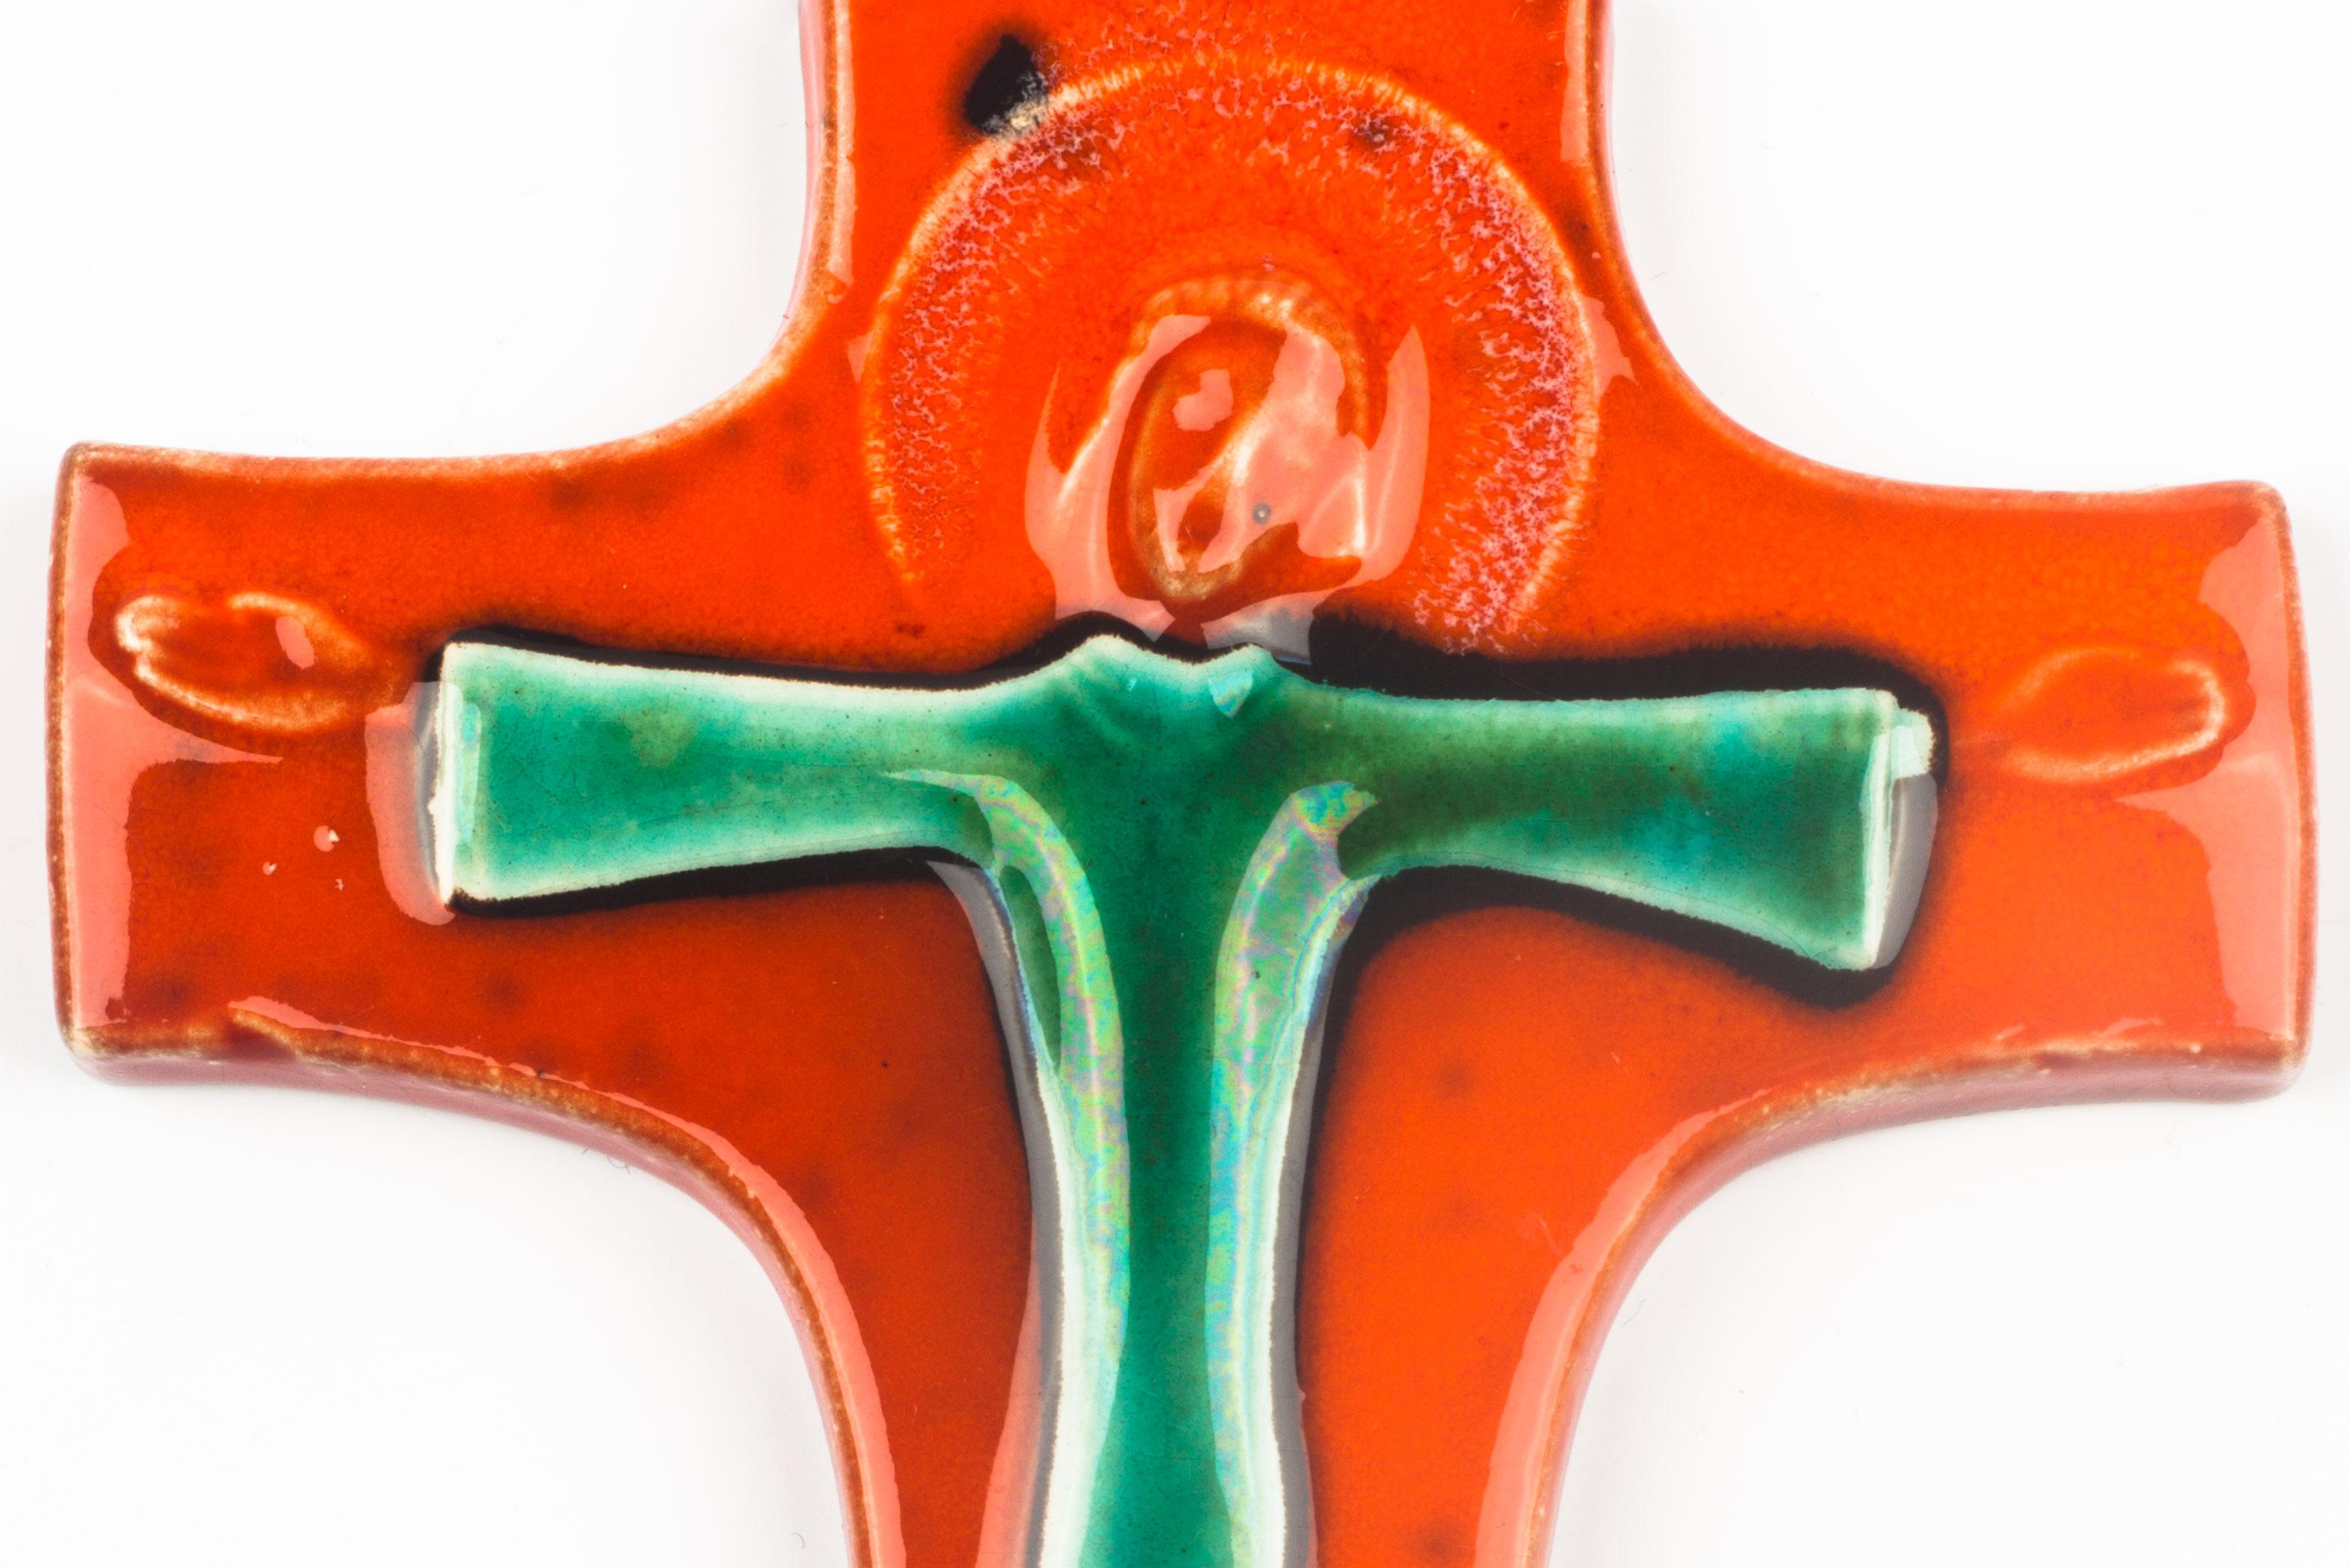 Crucifix in glazed ceramic, handmade made in Belgium in the 1970s. Glossy bright orange, green and black & white cross with raised christ figure at its center.

This piece is part of a large ceramic crucifix collection, all made in Belgium between